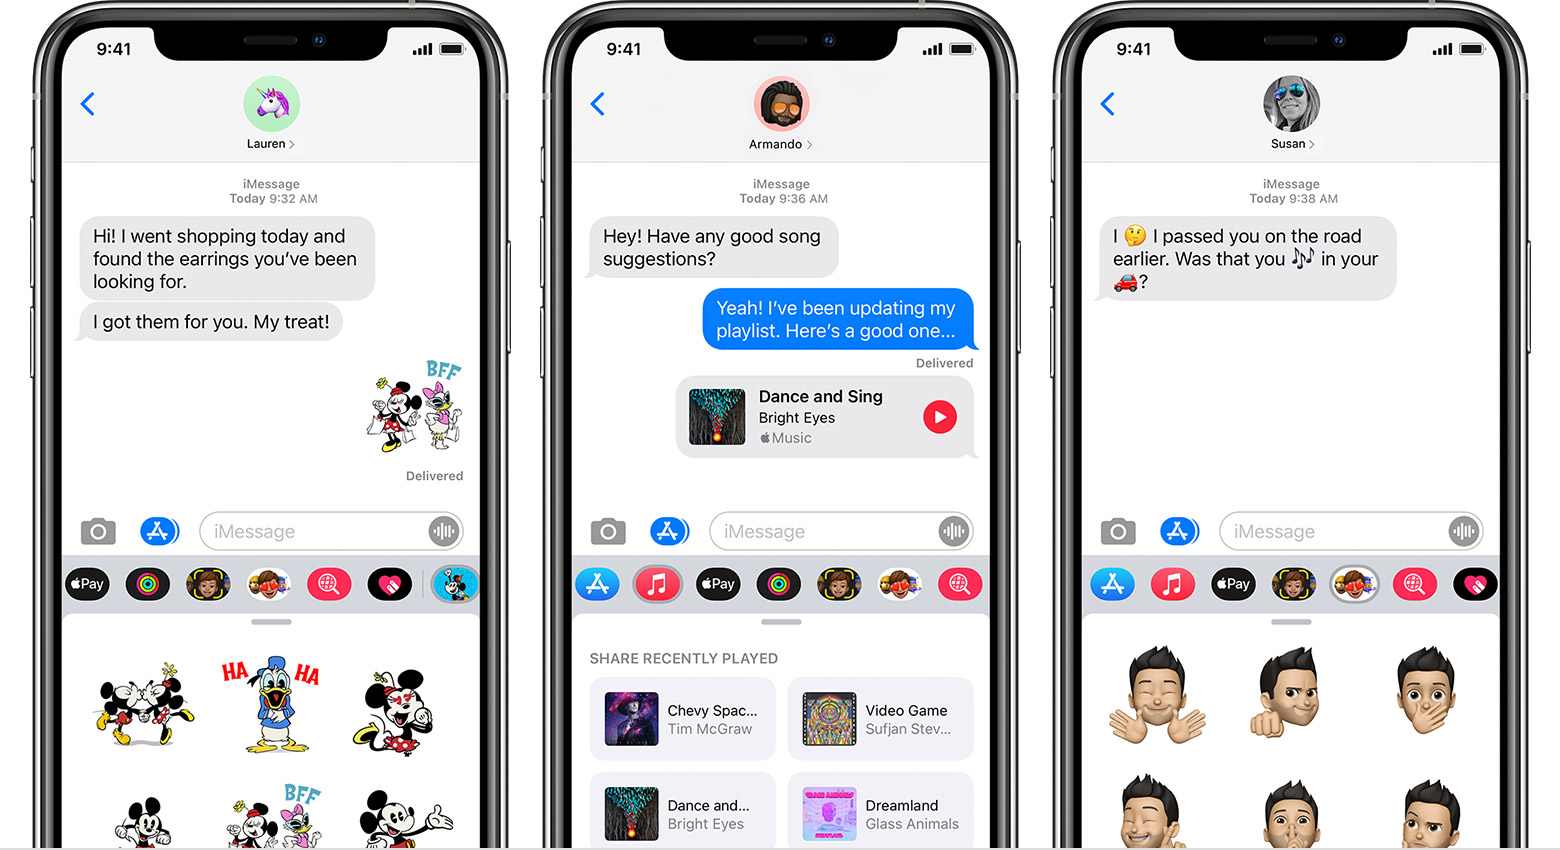 iMessage on Android ‘will hurt us more than help us says Apple